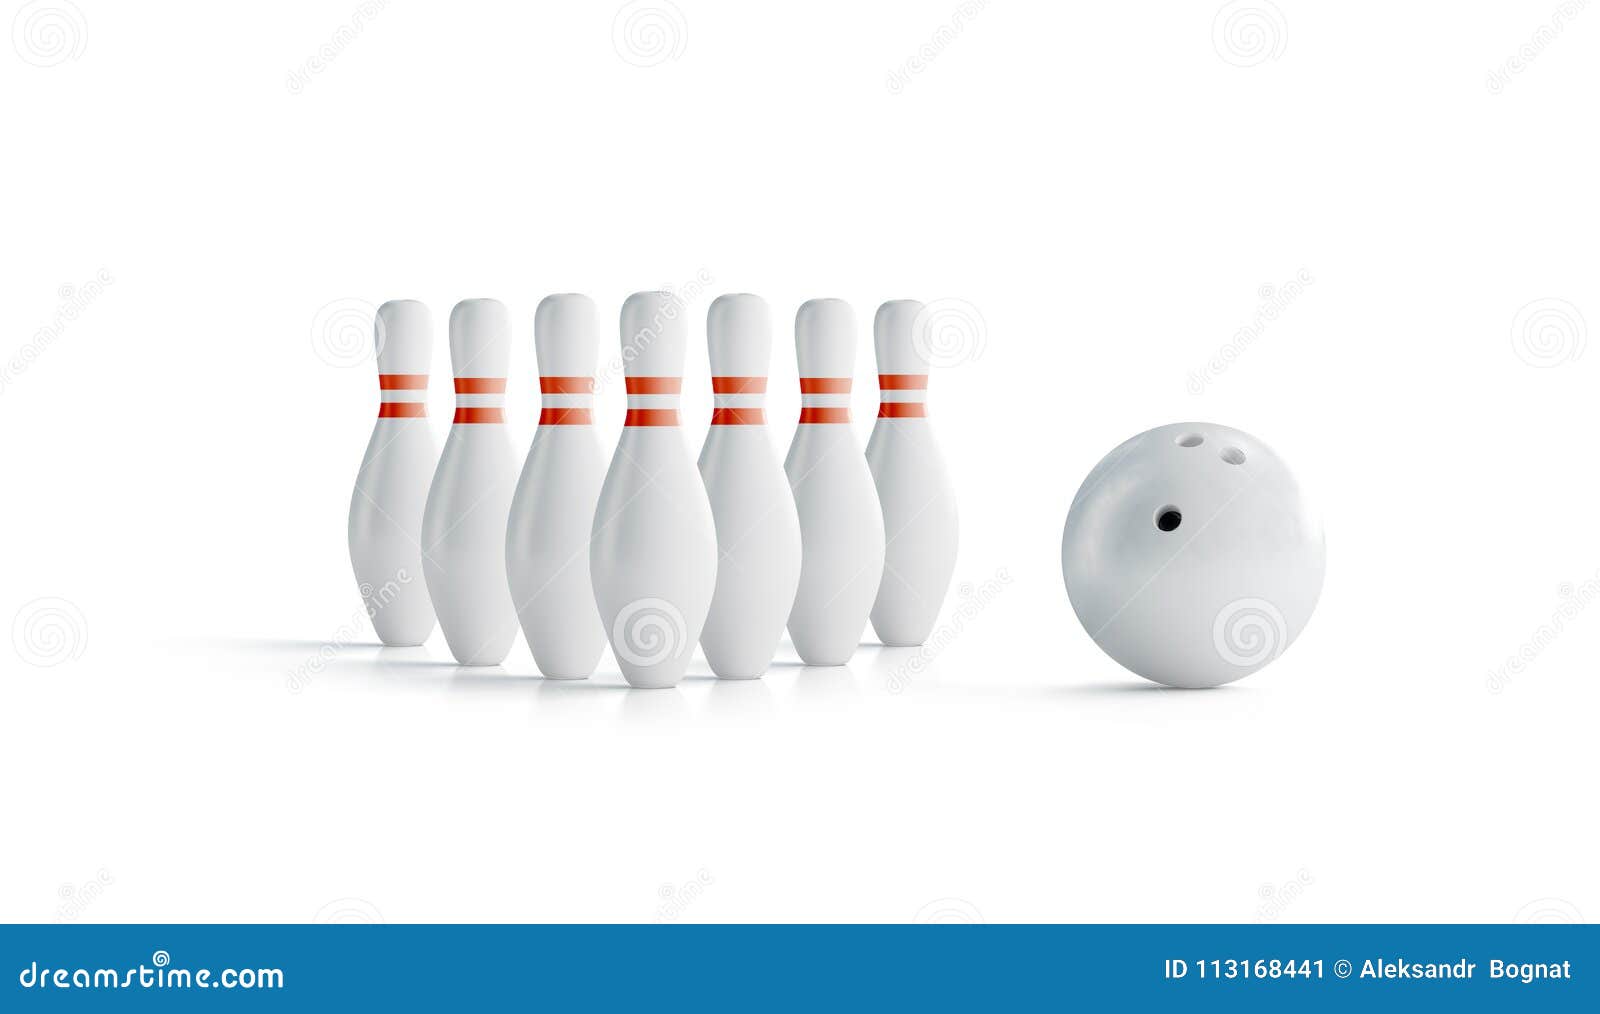 Download Blank White With Red Stripes Bowling Skittle And Ball Set ...